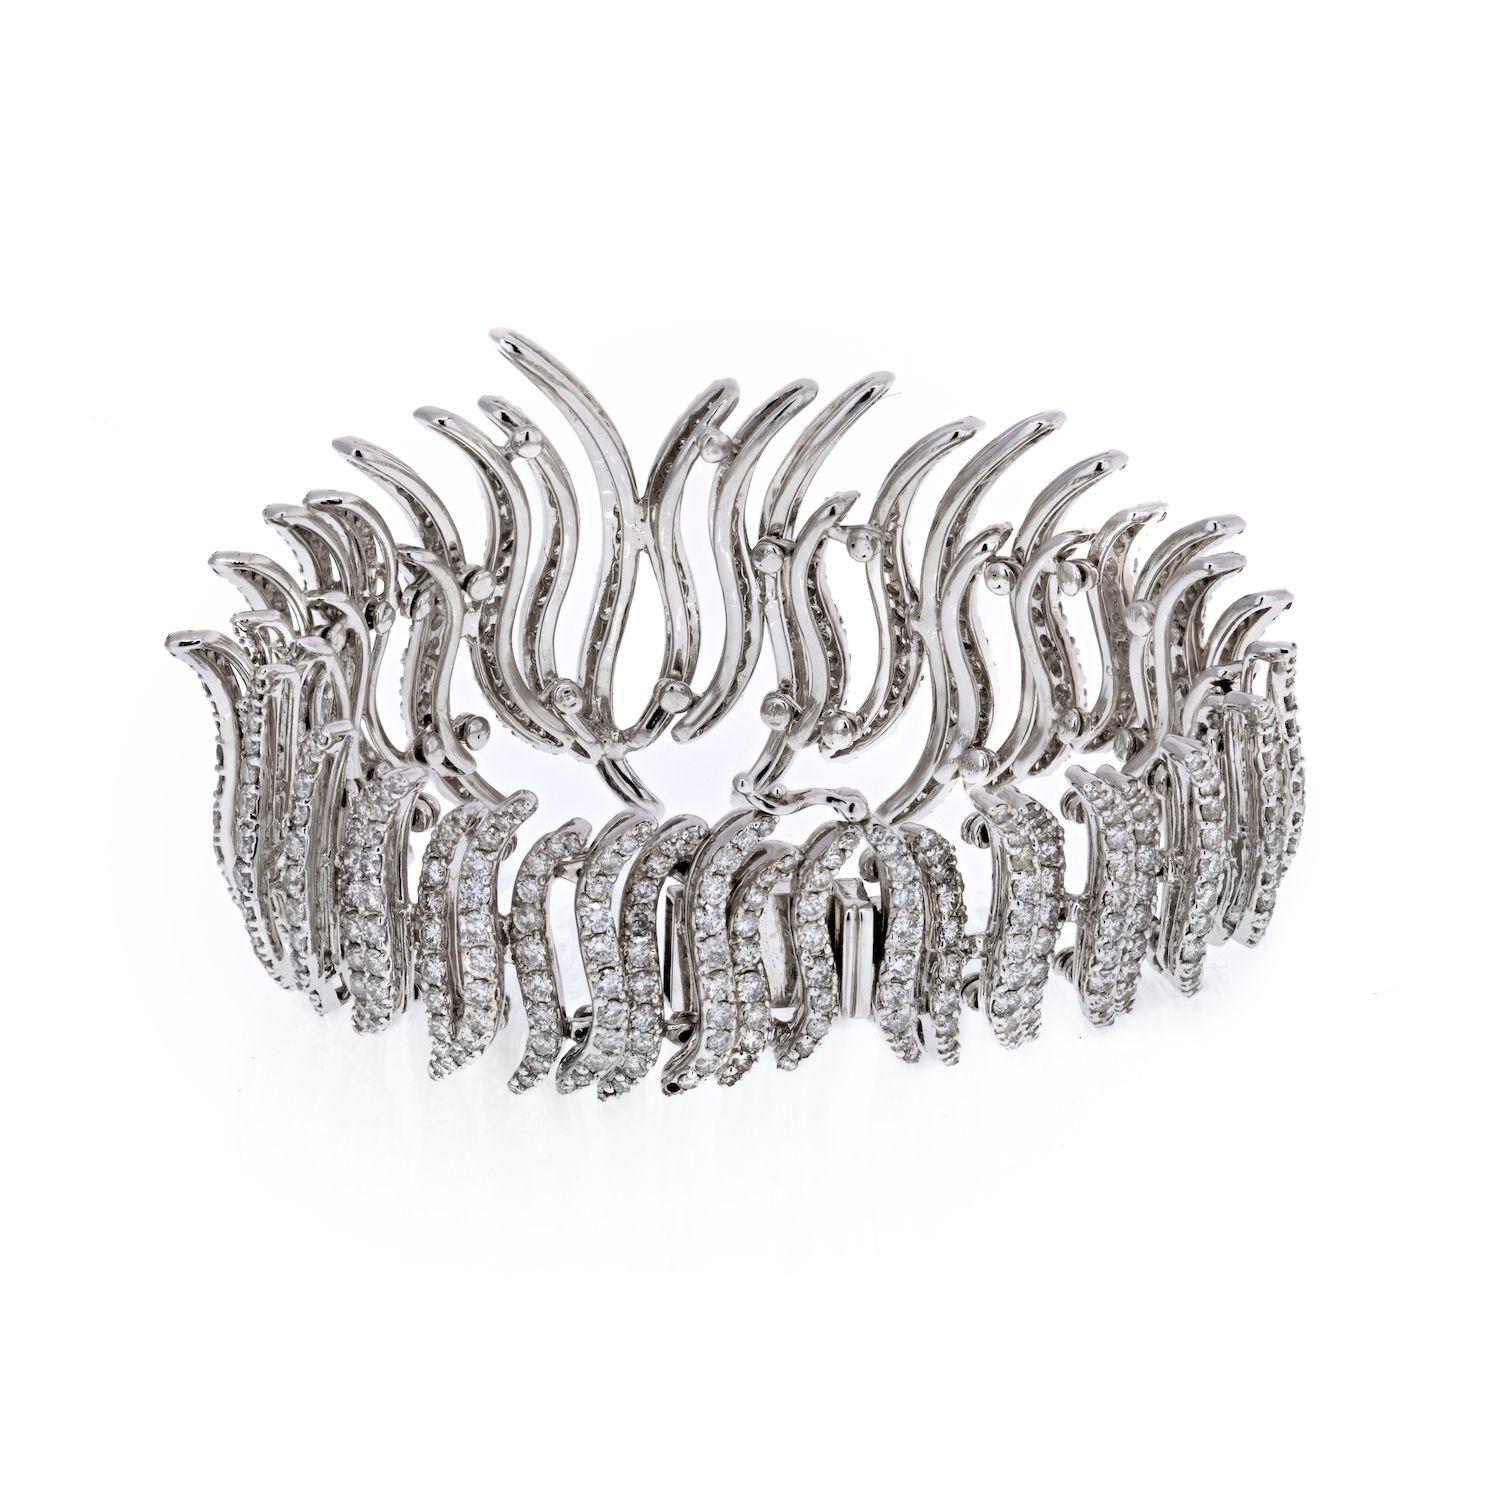 This incredible sculpted strips diamond bracelet is extremely exquisite in design and style. The breathtaking item is lavishly designed in shimmering 18K white gold and adorned with 18cts of captivating round cut diamonds.
Diamond Quality: G-H